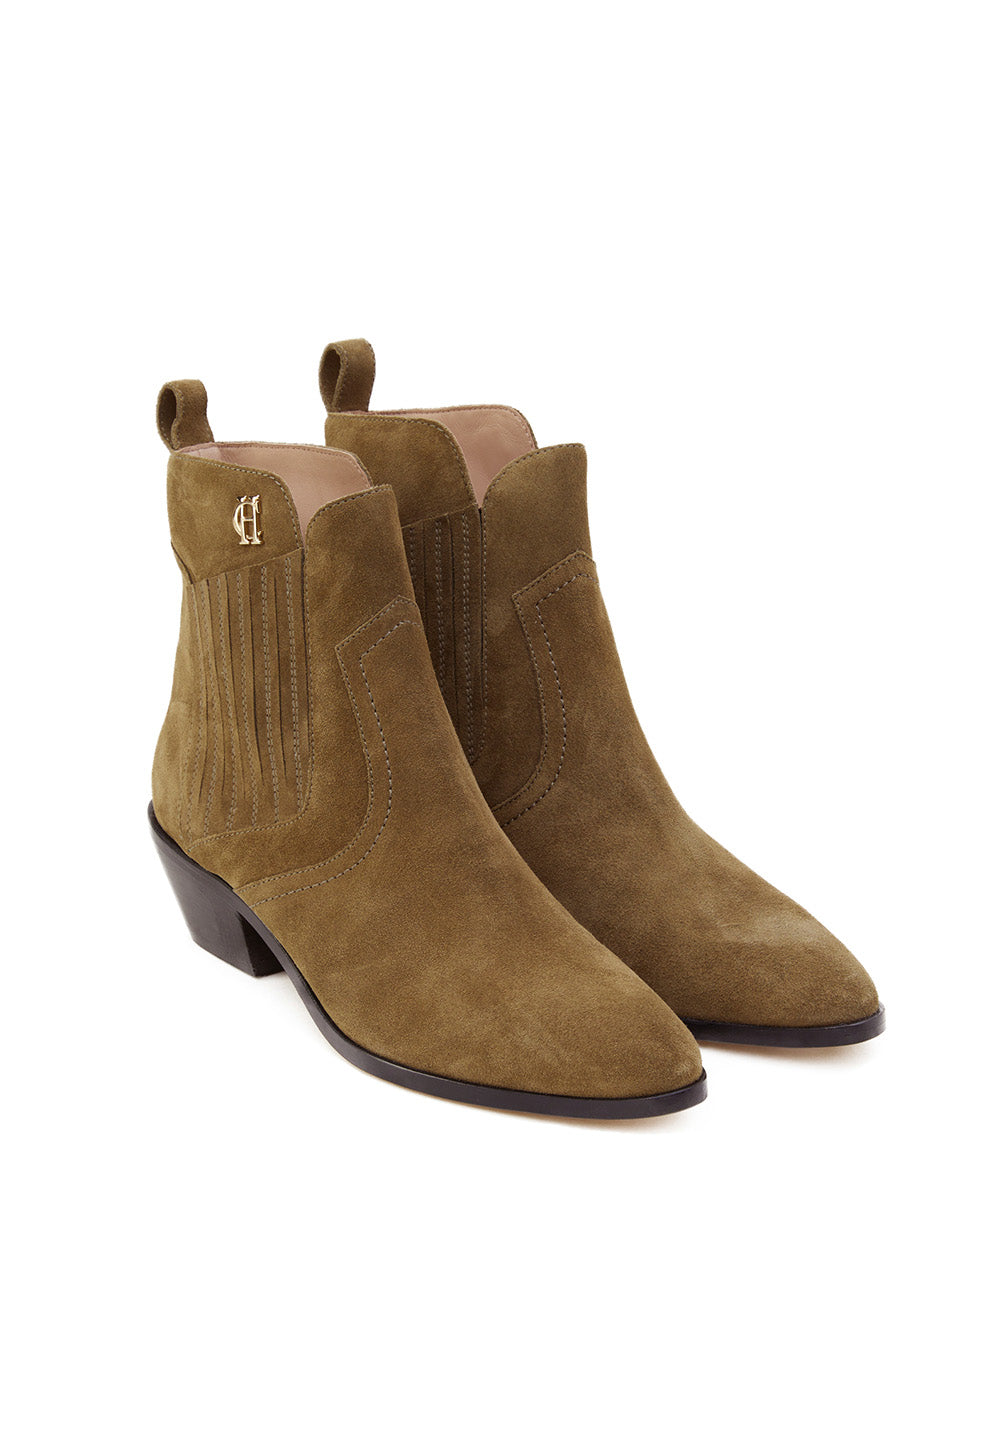 Western Chelsea Boot - Khaki Suede sold by Angel Divine